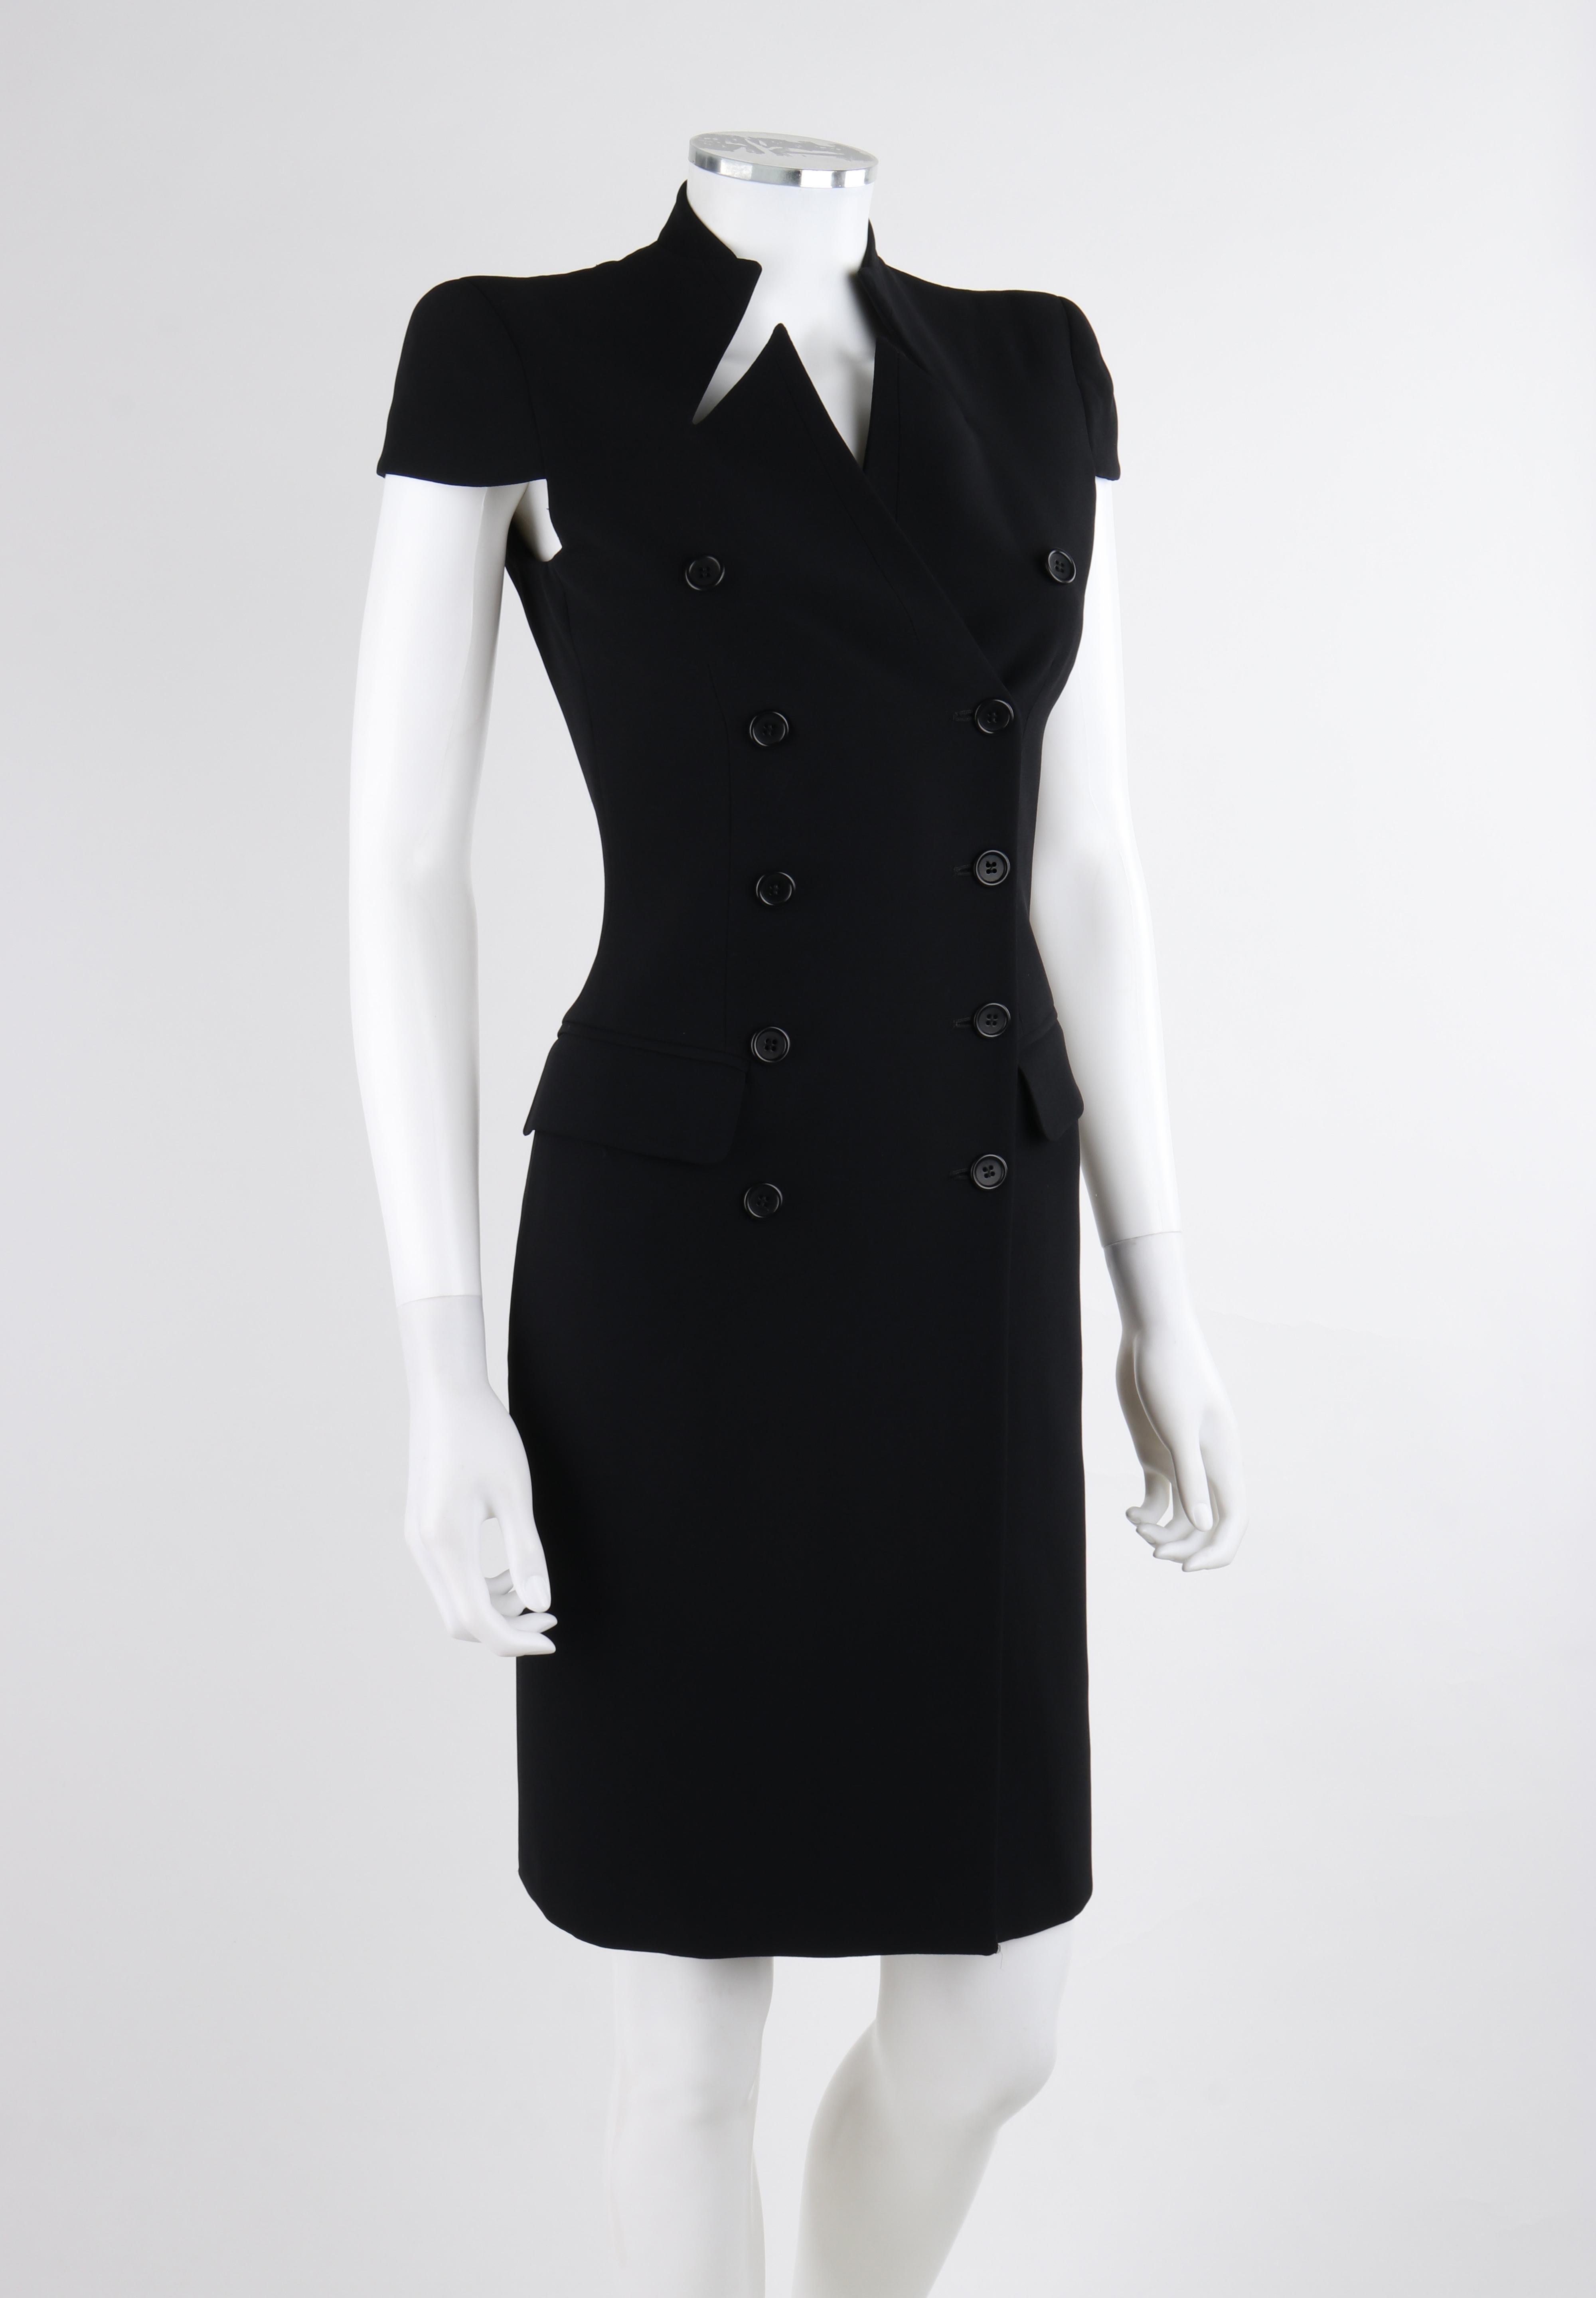 ALEXANDER McQUEEN c.2012 Black Double Breasted Button Up Collar Cocktail Dress In Good Condition For Sale In Thiensville, WI